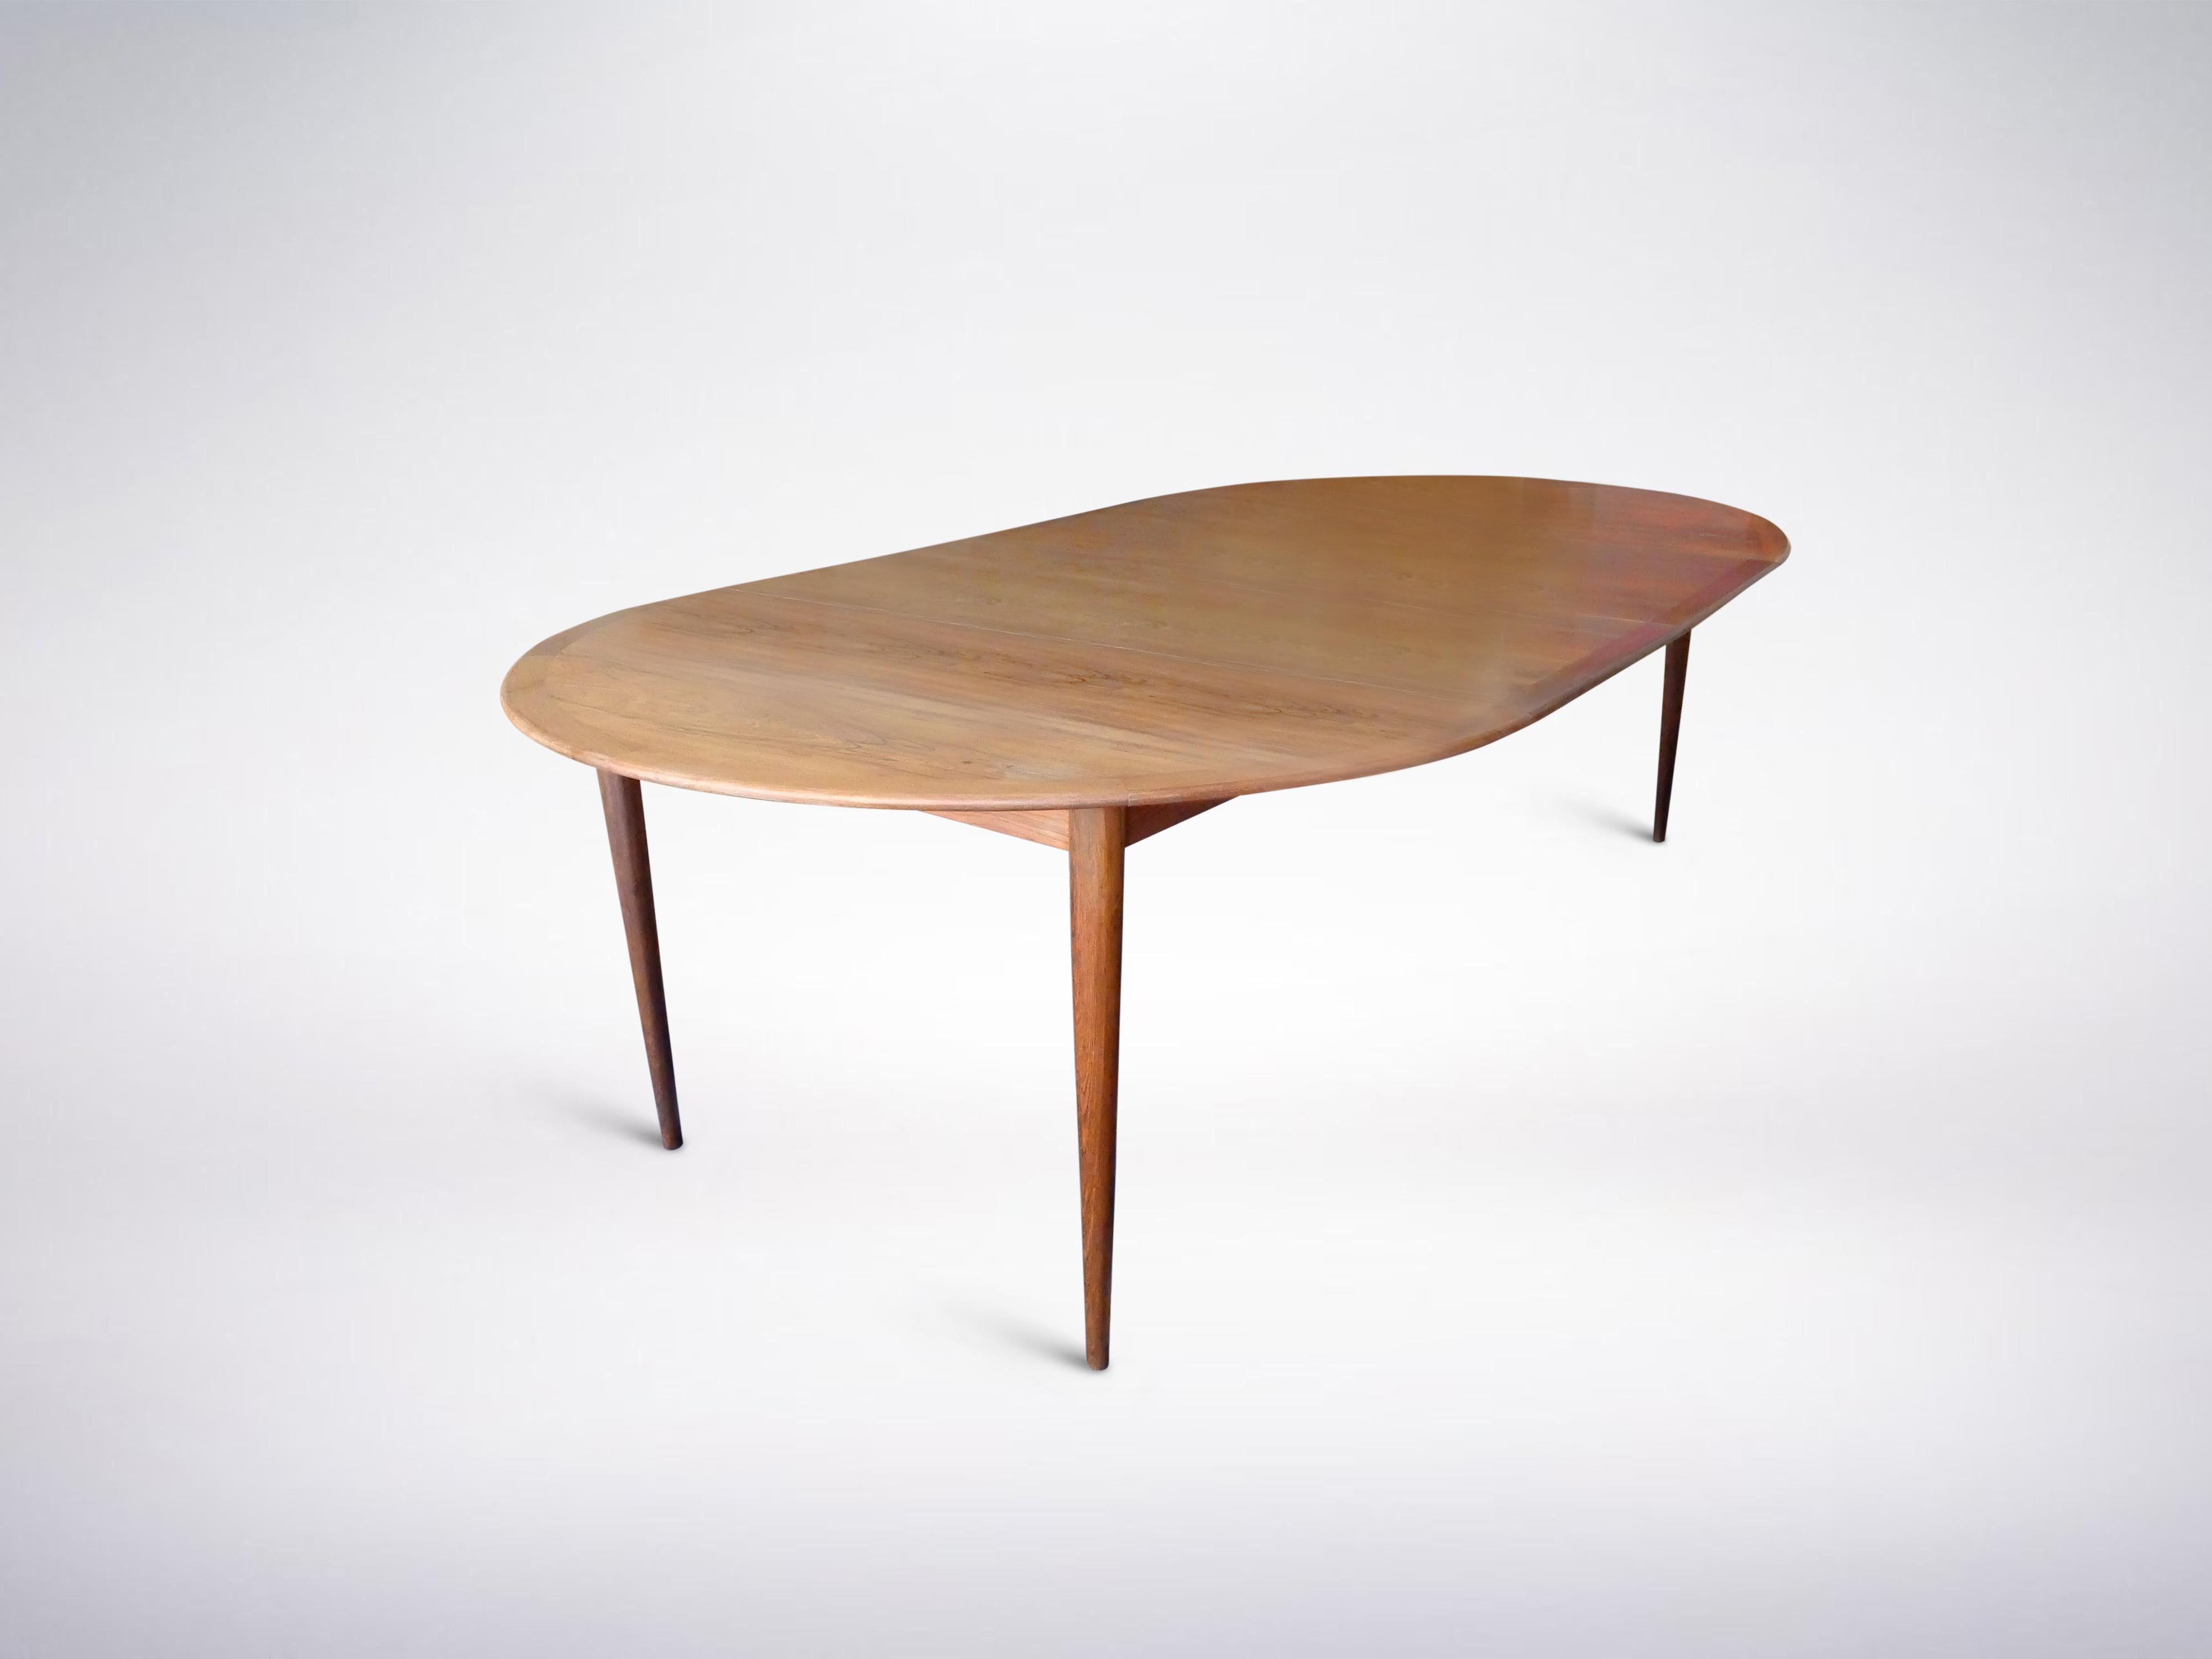 Henry Rosengren Hansen for Mobelindustri, Danish mid-century dining table in rosewood, 1960

An awesome Teak dining table by Henry Rosengren Hansen for Brande Møbelindustri. This table is extremely well built and designed to last, being constructed